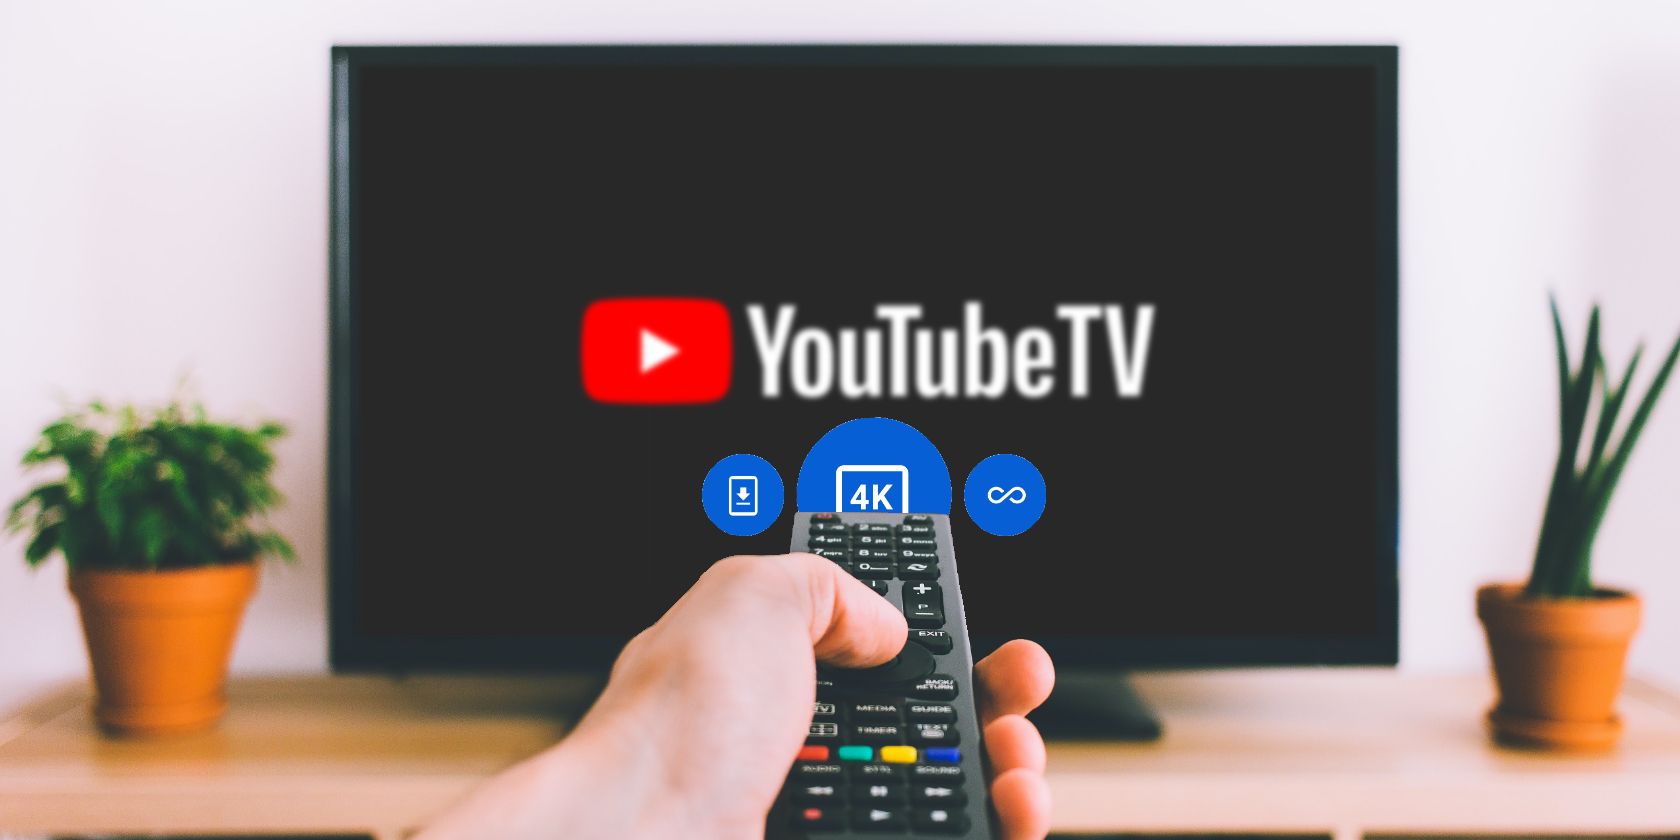 Youtube Tv Now Boasts 4k Video And Offline Downloads For A Price